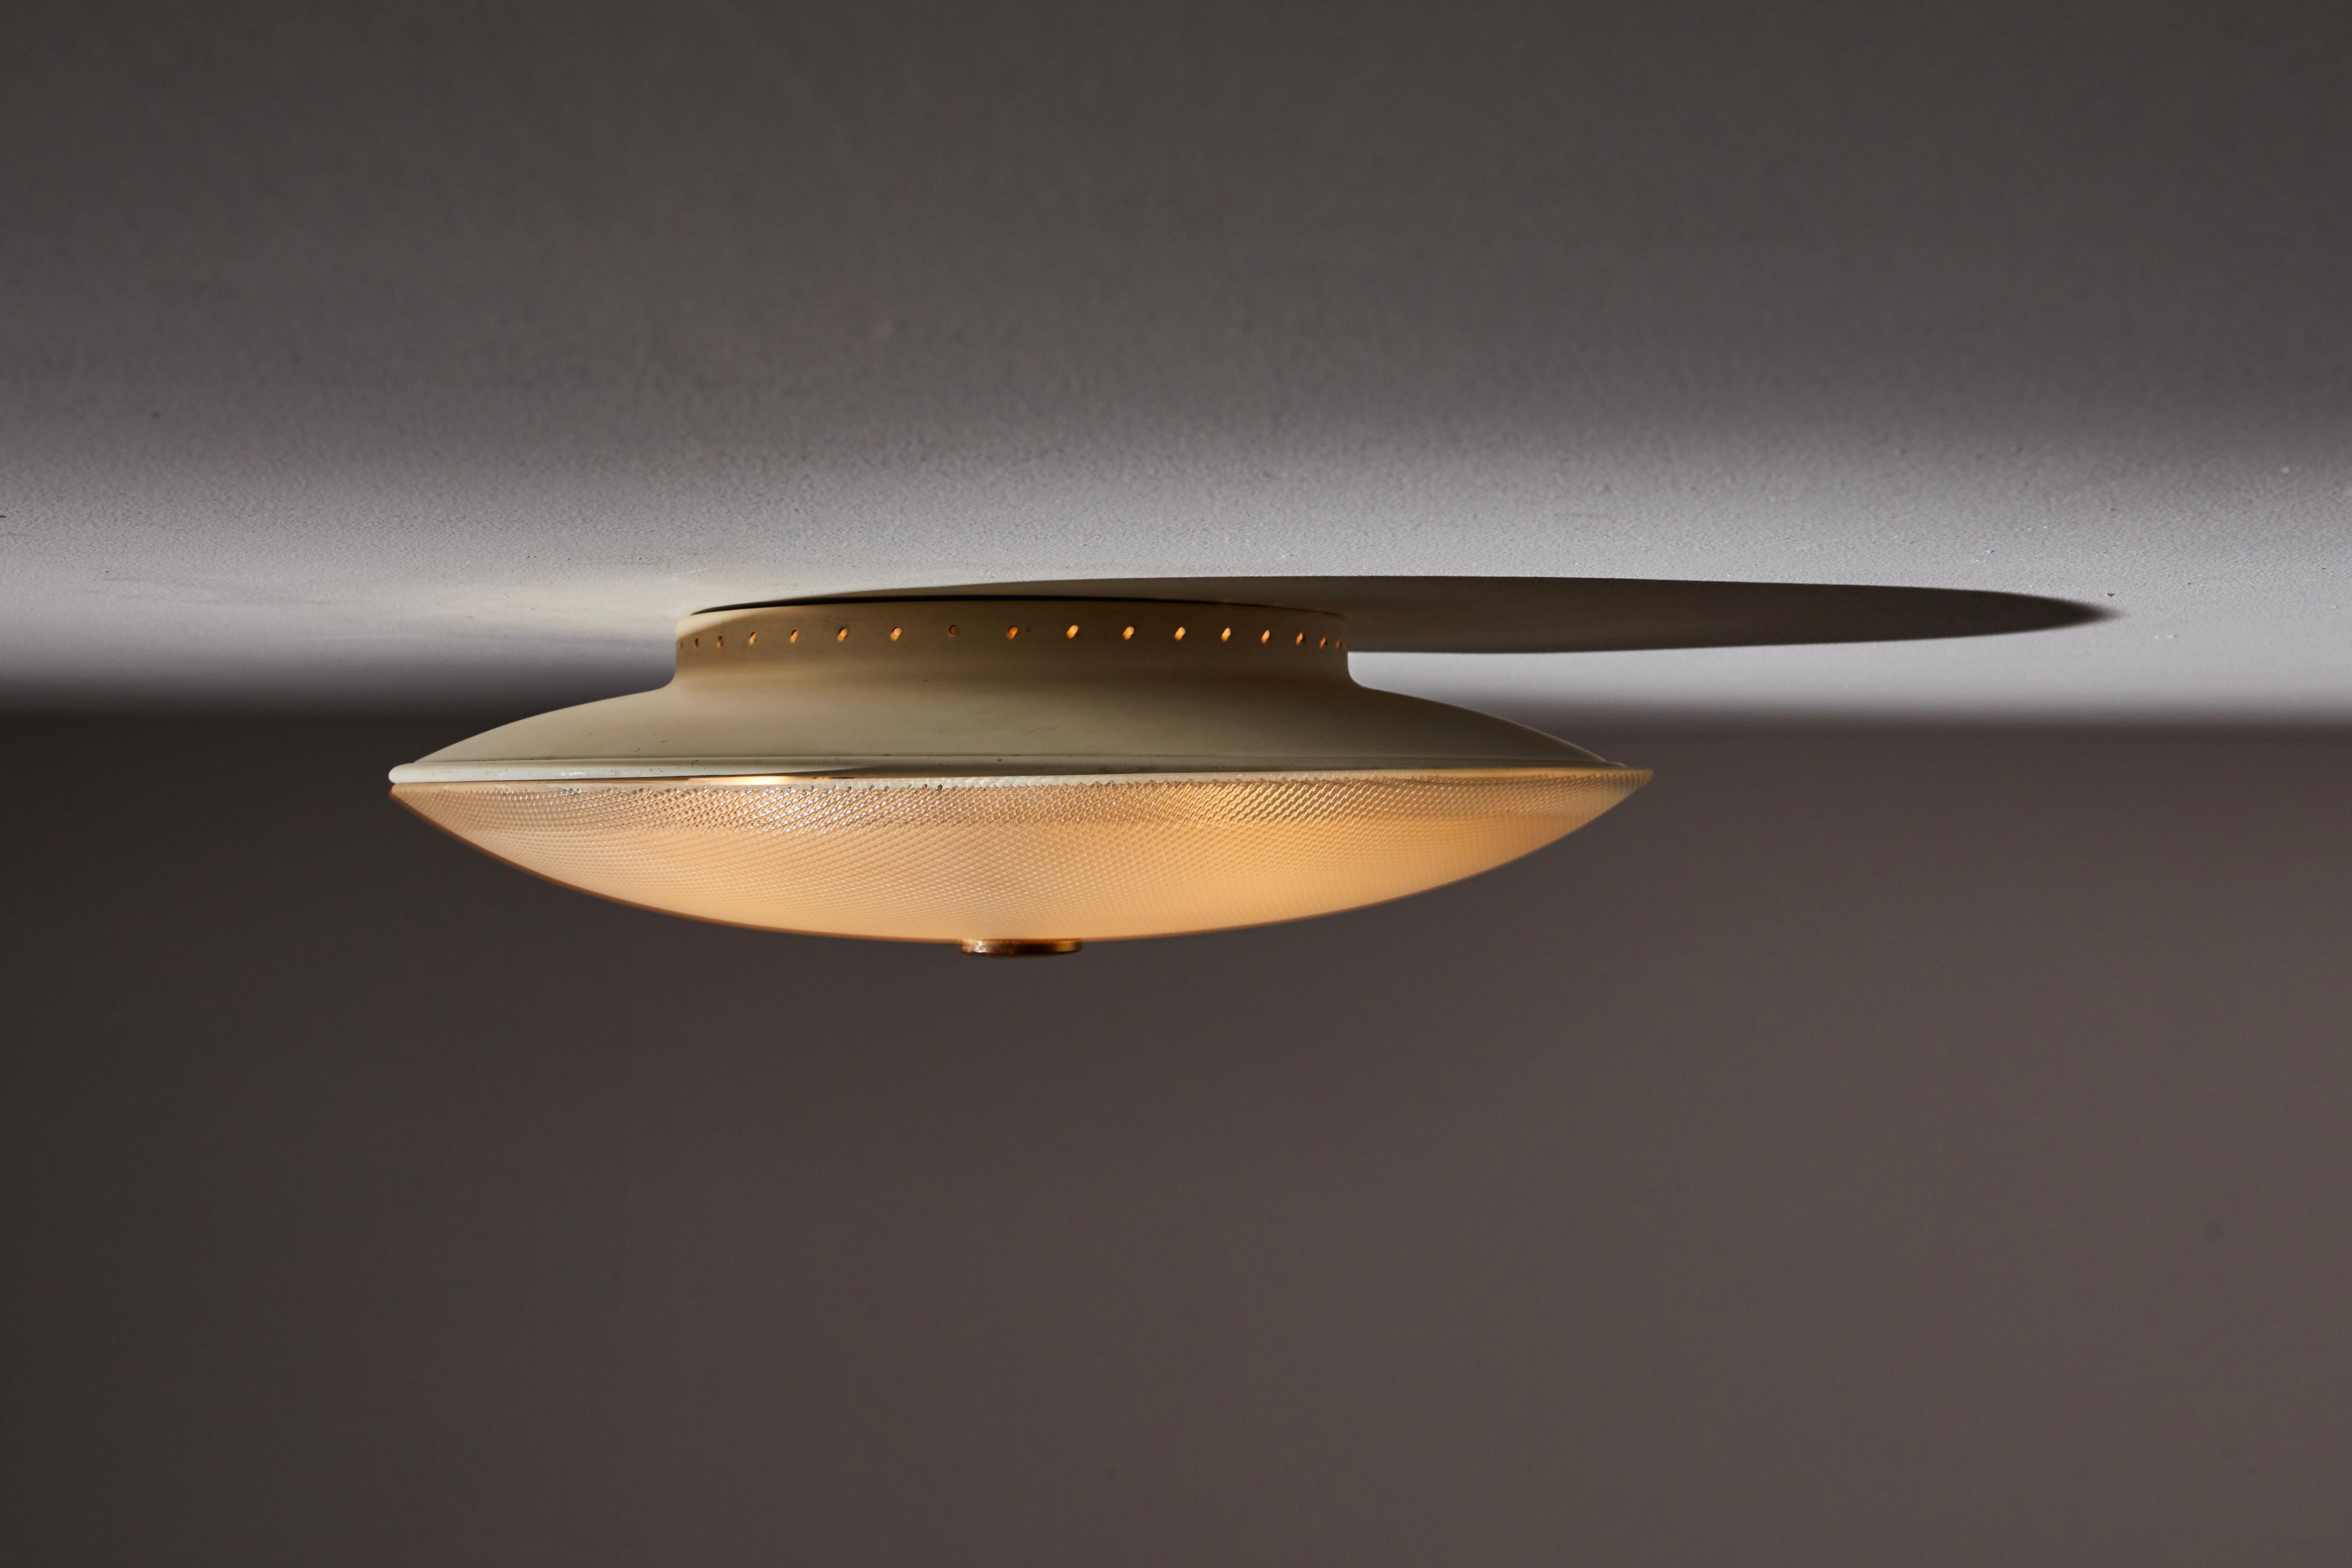 Flush mount ceiling light by Stilnovo. Manufactured in Italy, circa 1960s. Brass, enameled aluminum, Holophane glass. Retains original manufacturer's label. Rewired for US junction boxes. Takes three E27 40w maximum bulbs. Bulbs provided as a one